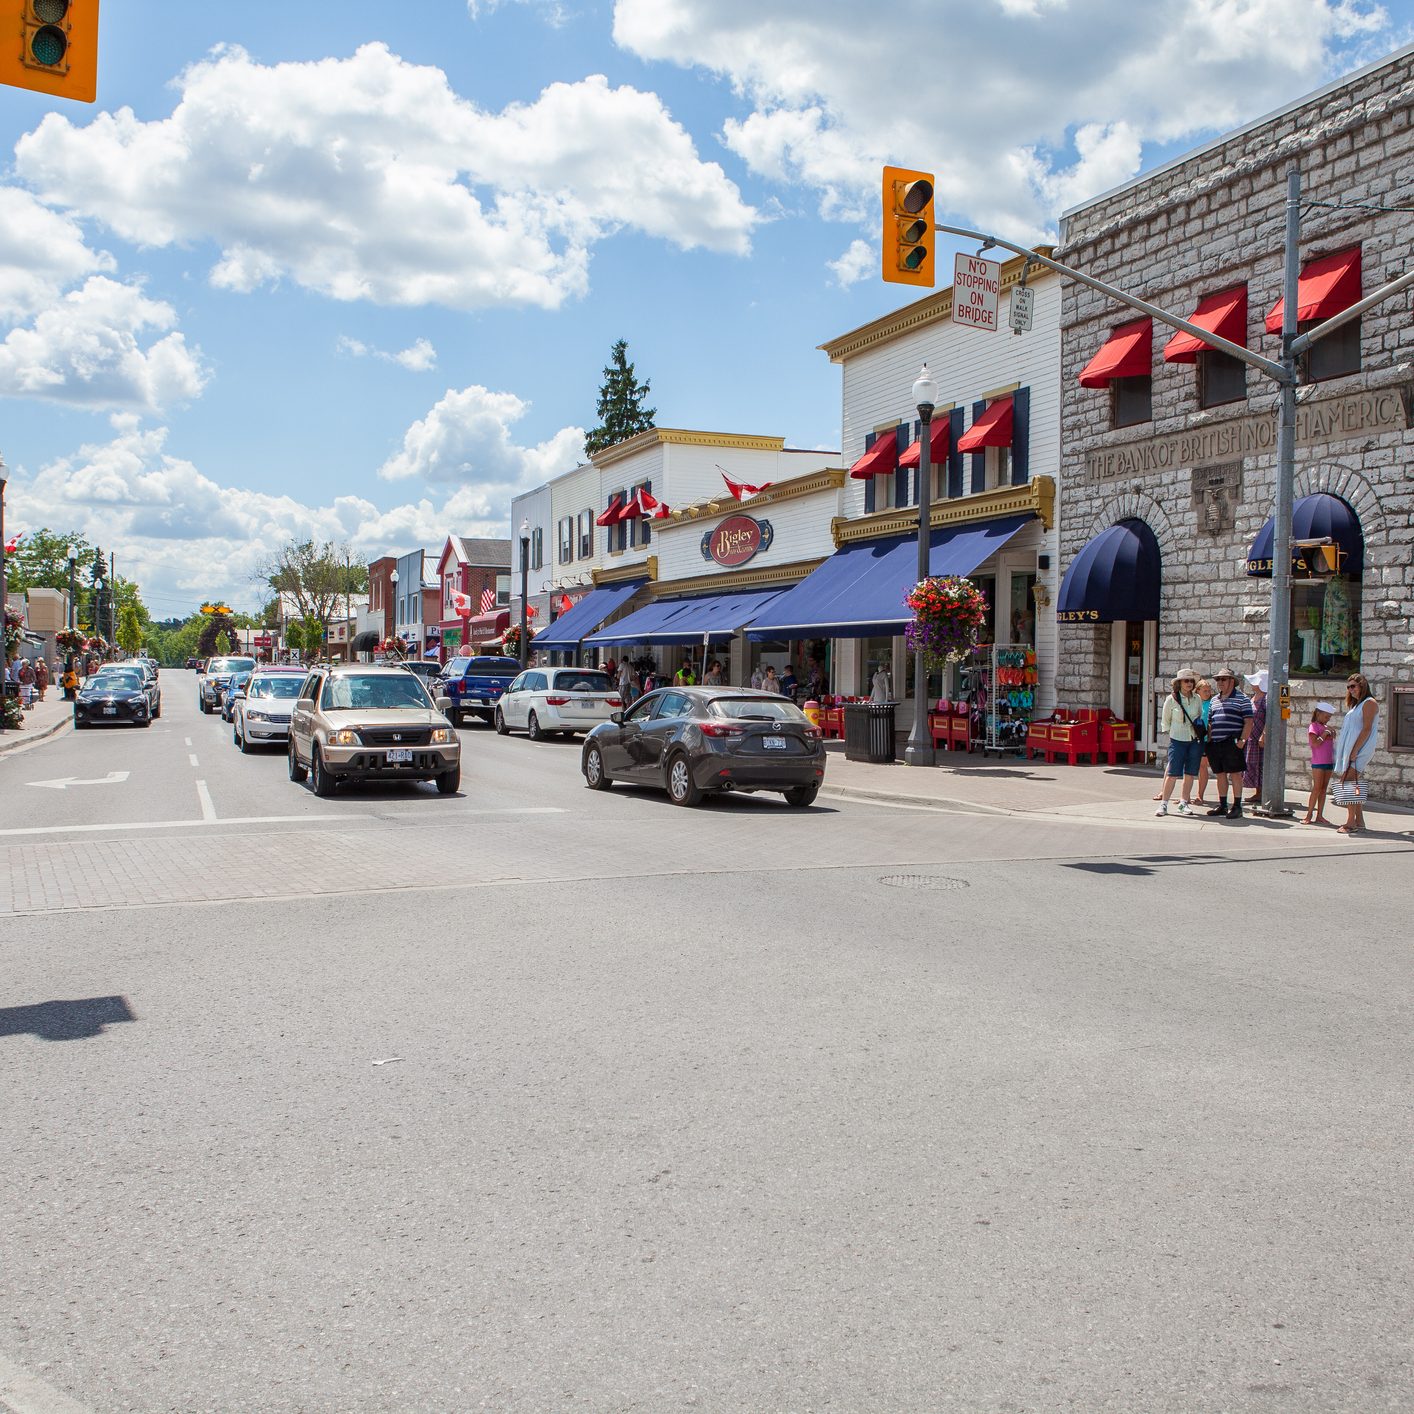 Bobcaygeon, Сanada - July 23, 2016: Traffic and People on Bobcaygeon's Main Street during a Summer Day - Editorial - Bobcaygeon, Ontario, Canada